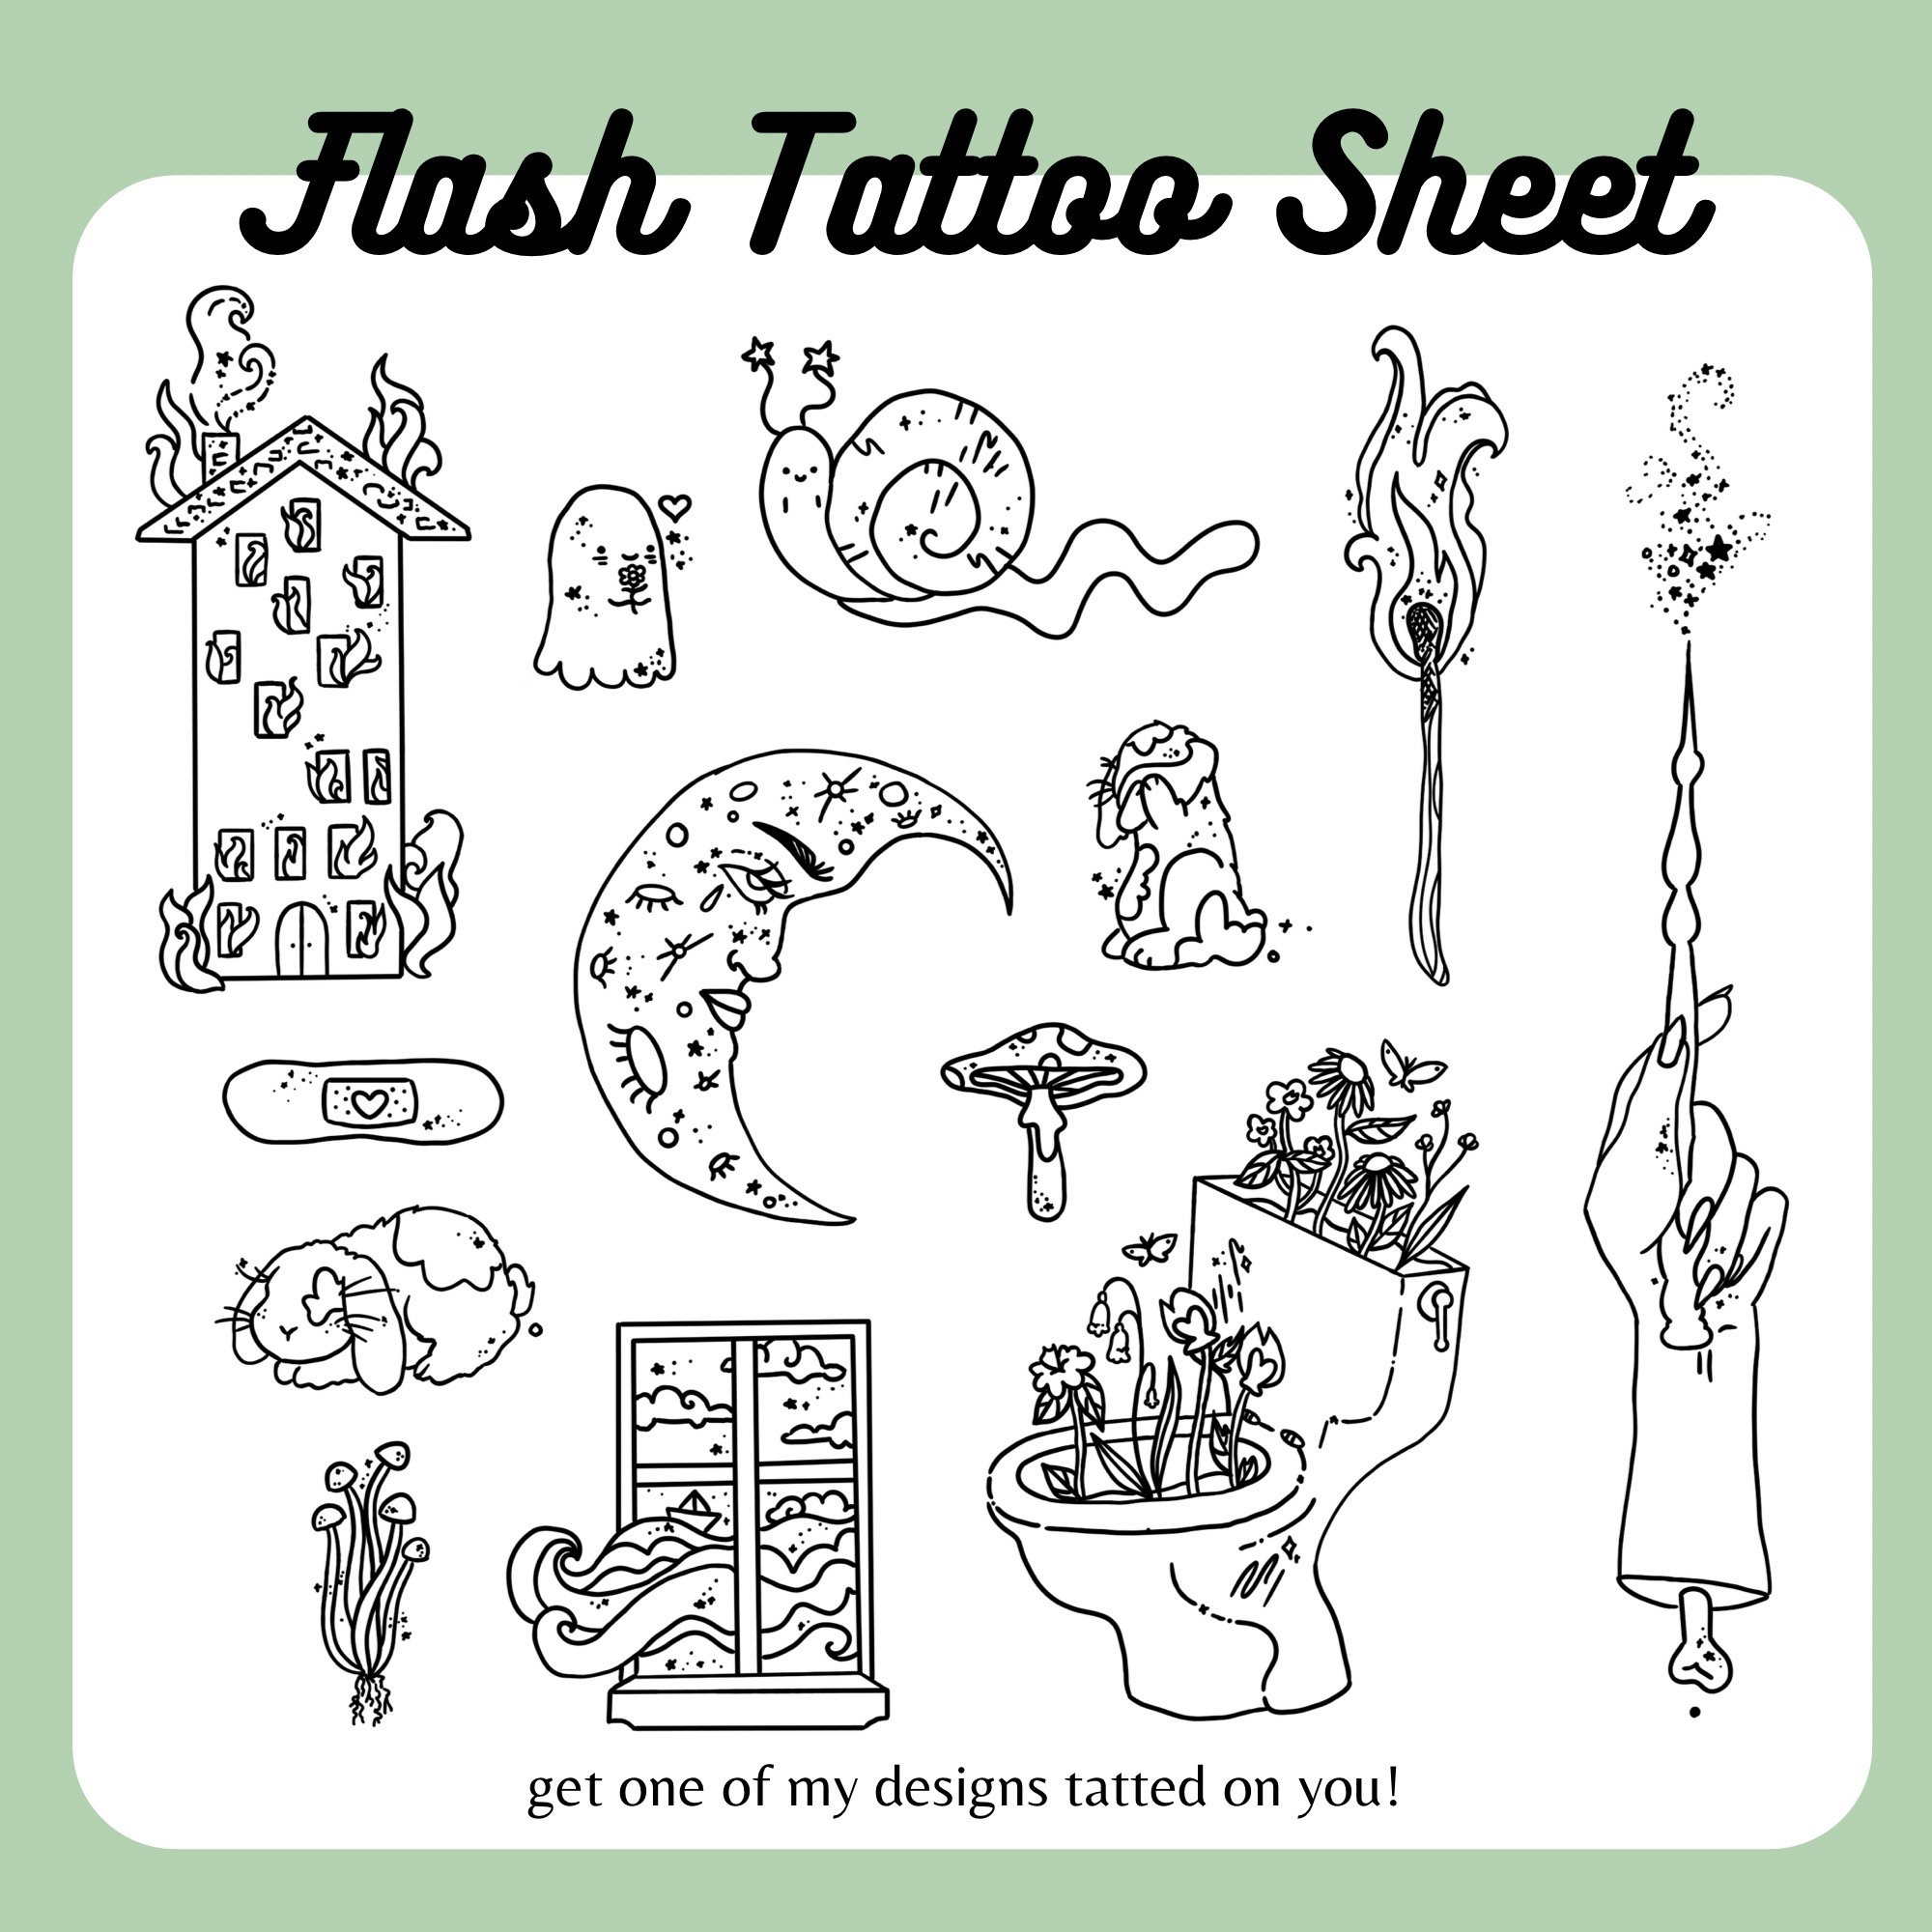 This is my third flash sheet of tattoo designs and theyre just getting  weirder and weirder  rfunny